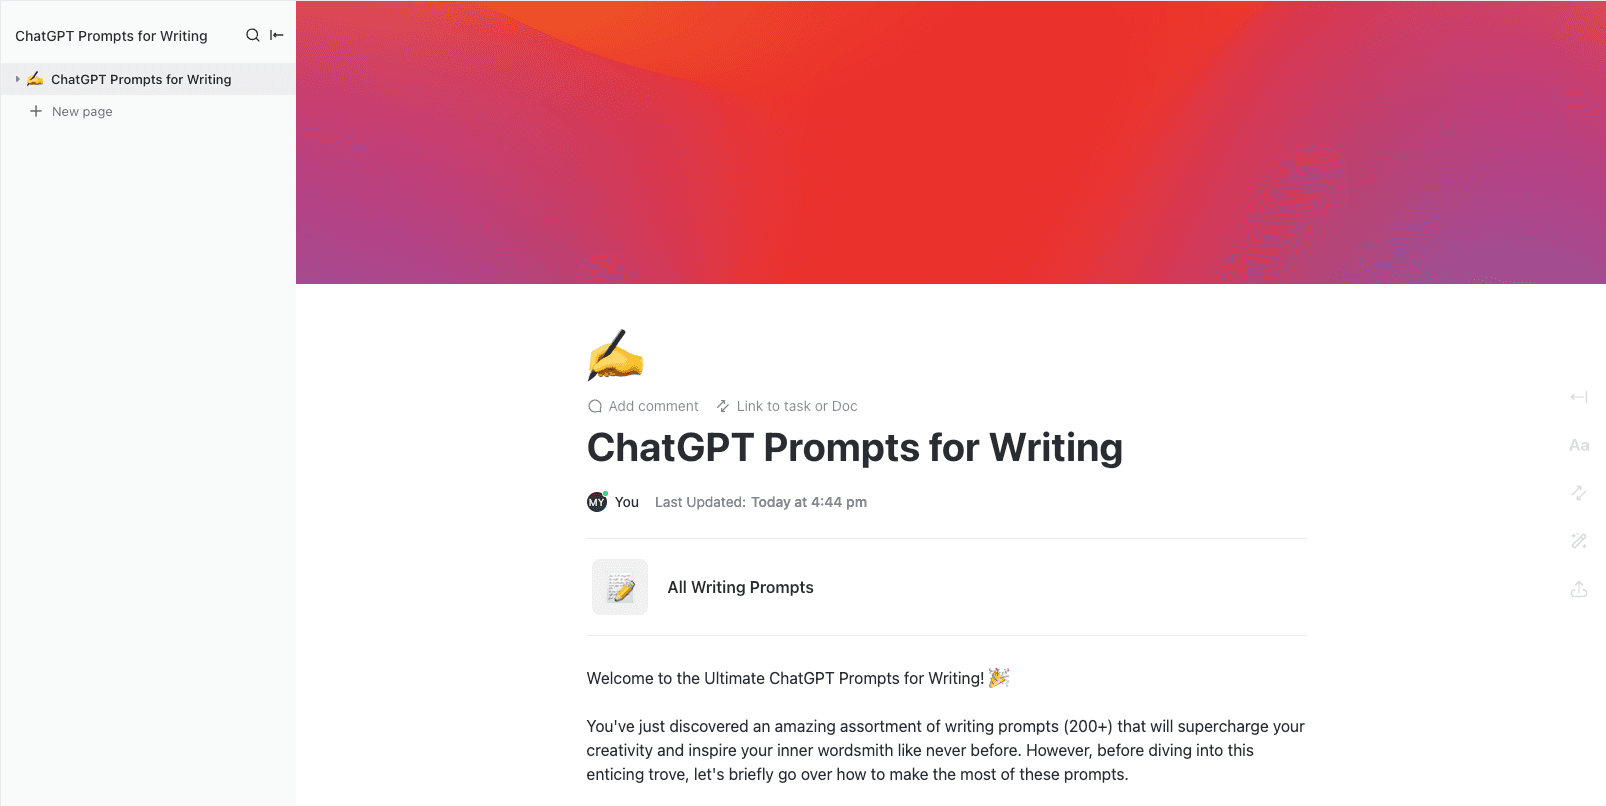 You've just discovered an amazing assortment of writing prompts (200+) that will supercharge your creativity and inspire your inner wordsmith like never before. 